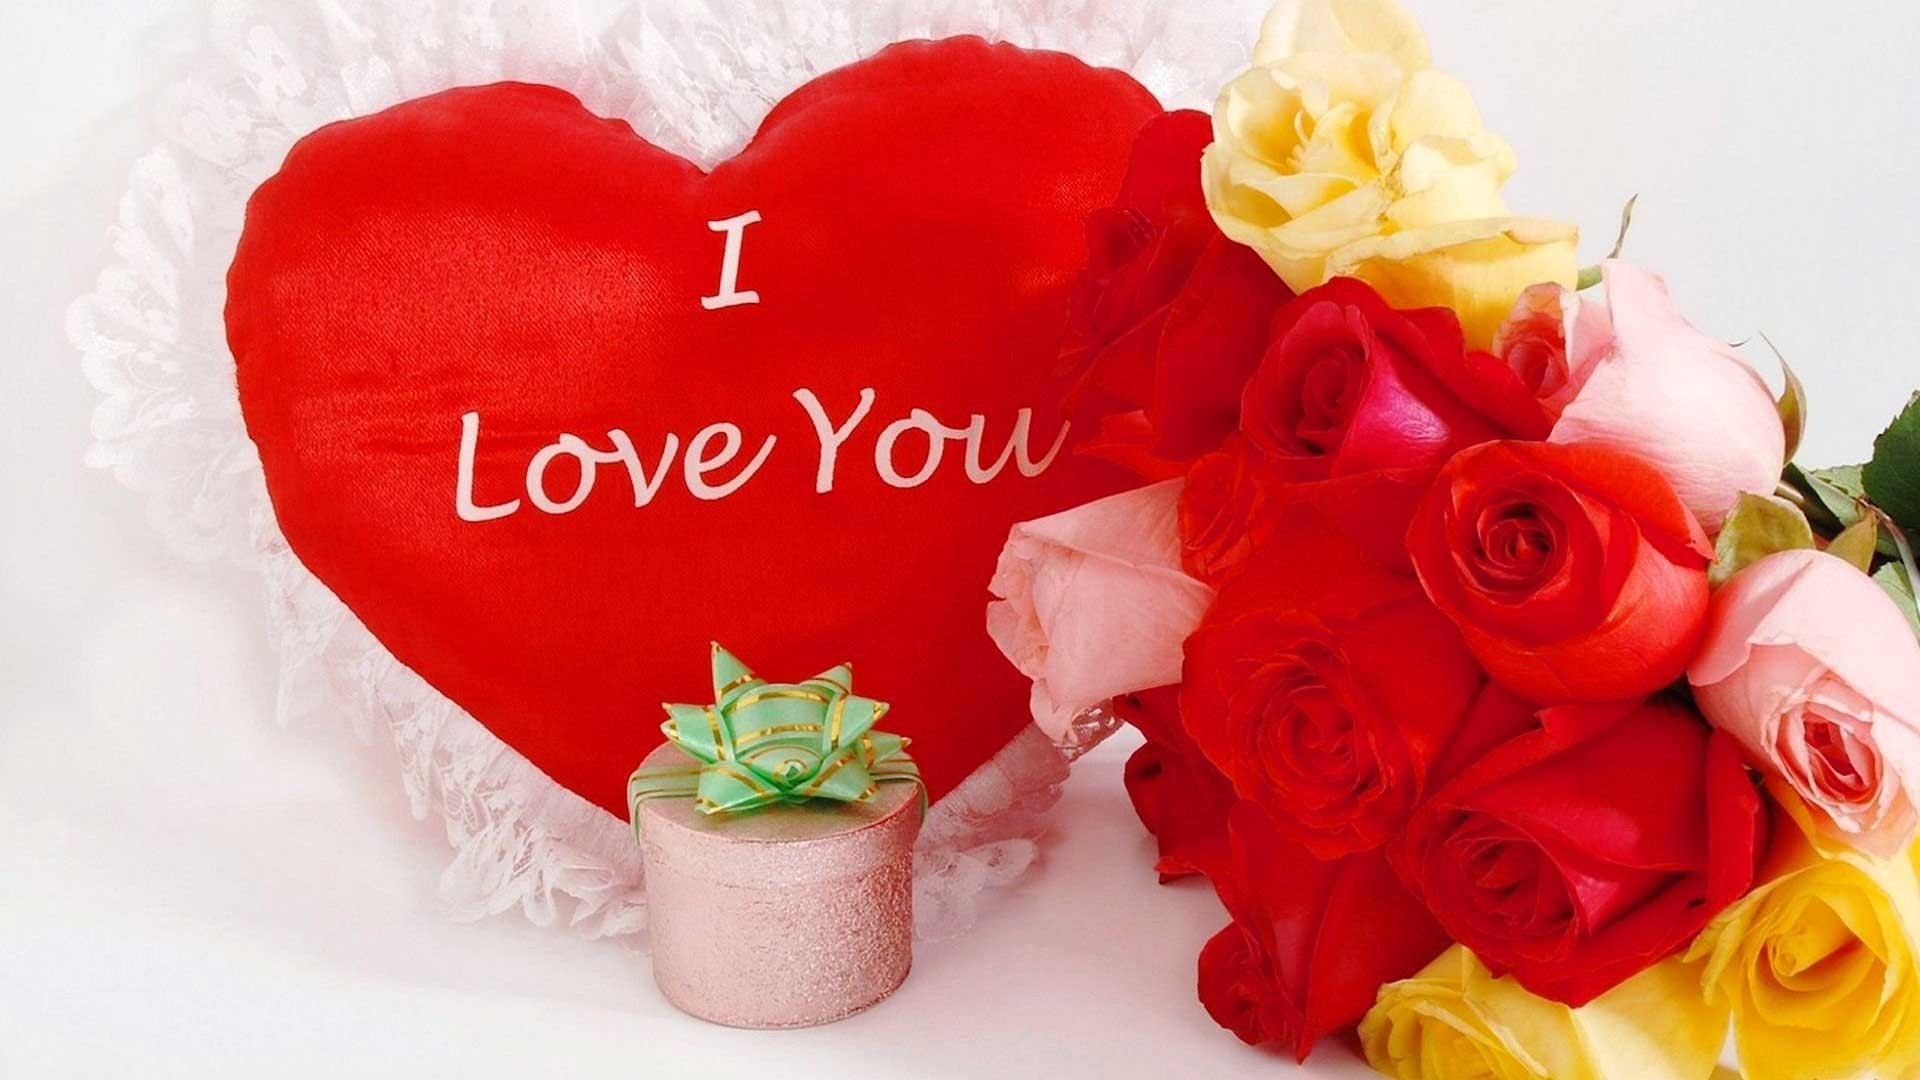 I Love You Pictures Images Wallpapers And Love Quotes 1920 1080 1920x1080